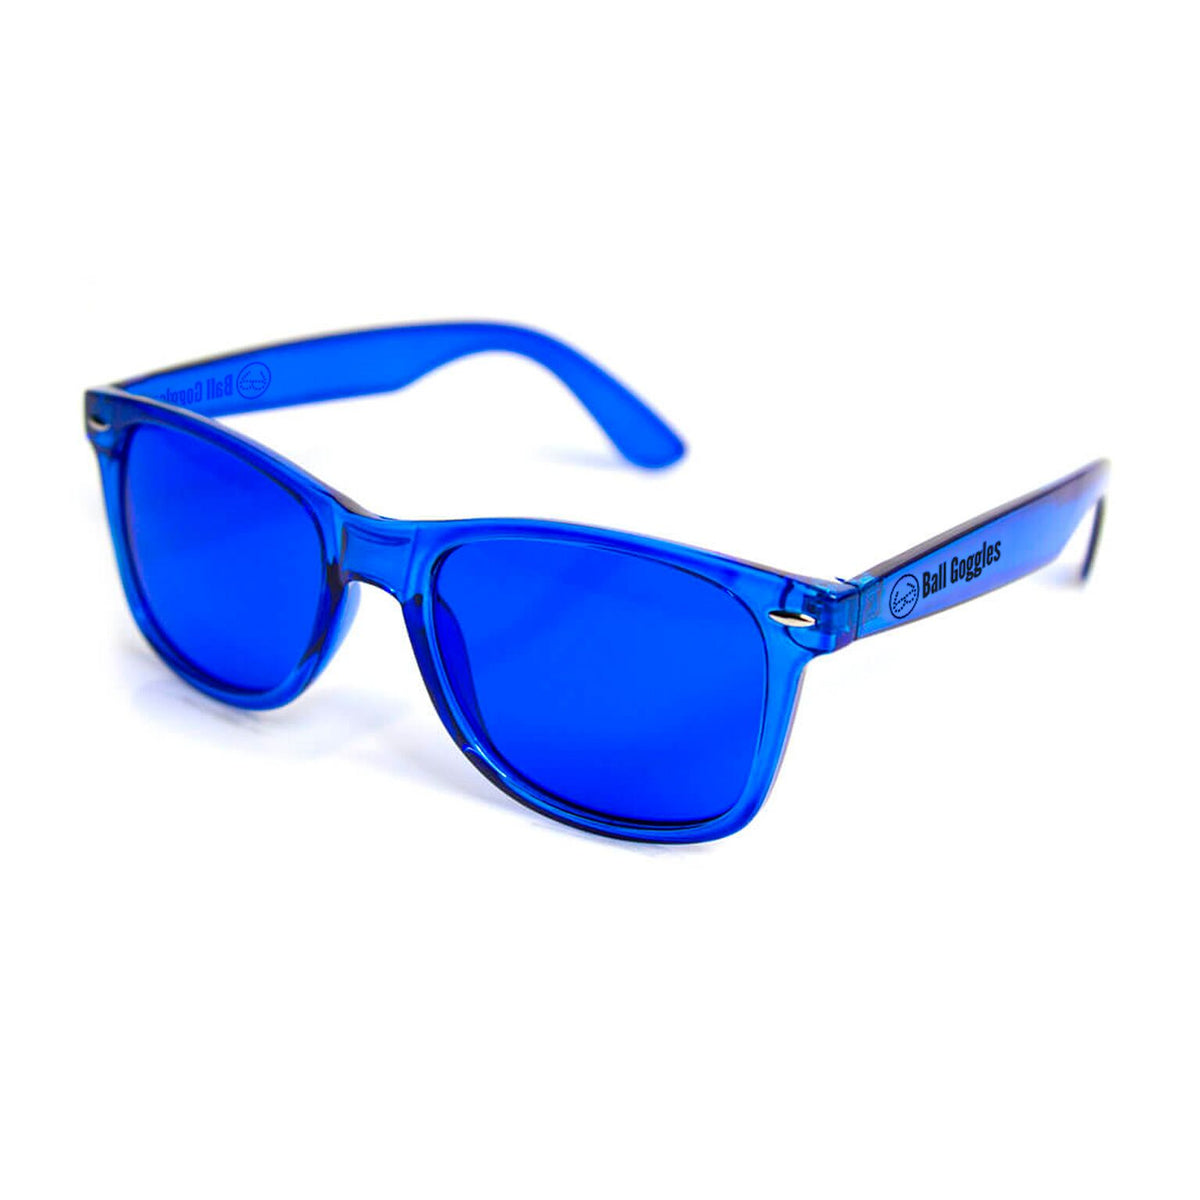 EVTSCAN Blue Lens Golf Ball Finder Glasses, with UV Protection, for Golfers  Finding White Golf Balls, Sporty Golf Sunglasses Locating Eyewear for  Outdoor Course, Sunny Days, Rangefinders -  Canada